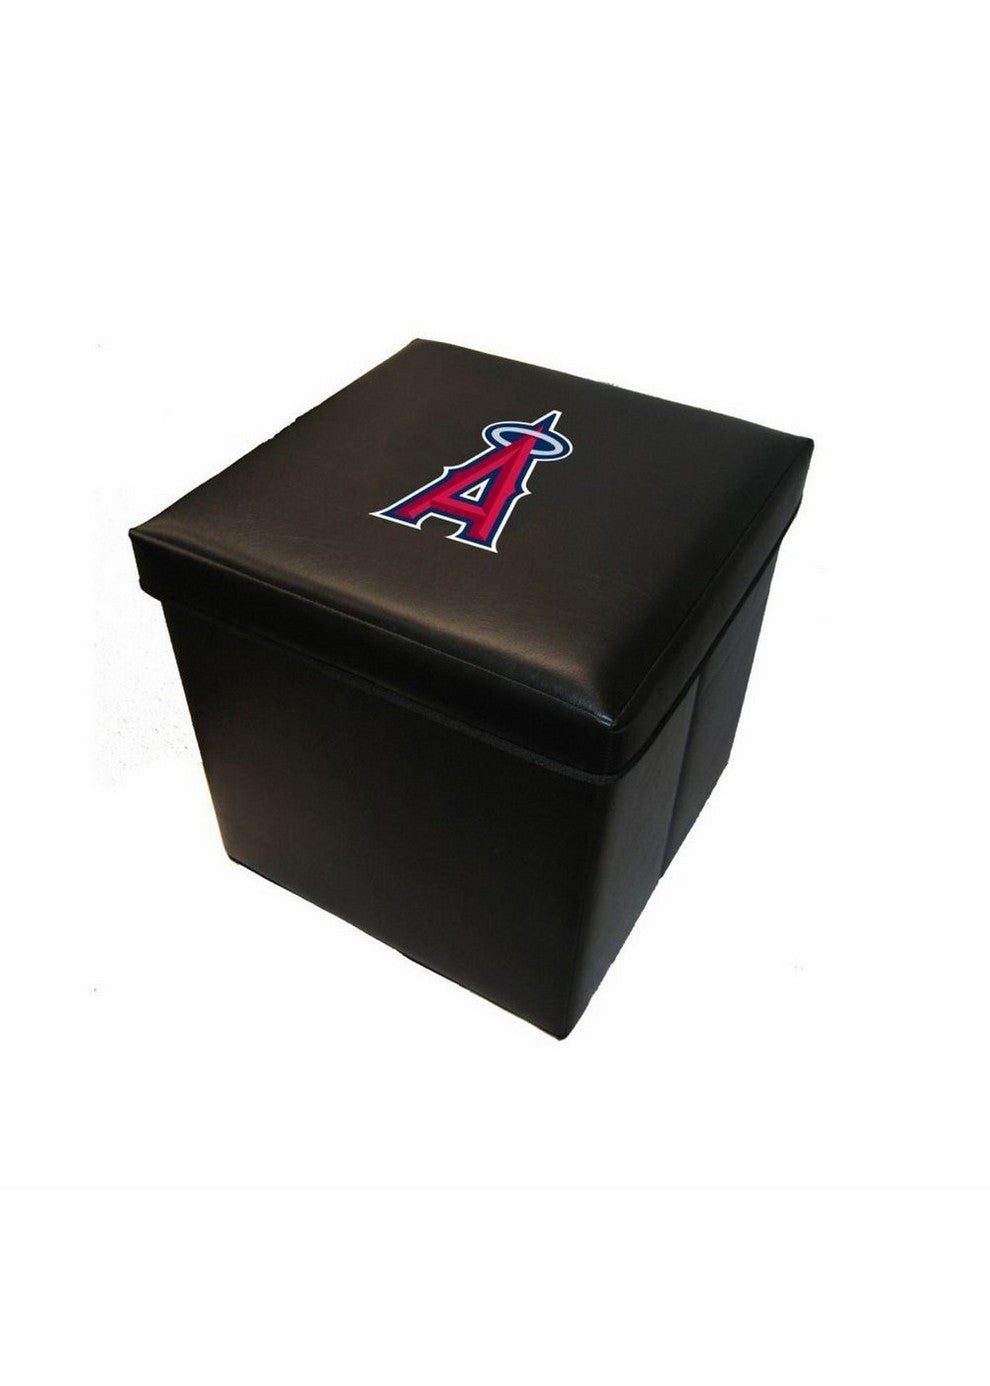 16-inch Faux Leather Team Logo Storage Cube - Los Angeles Angels